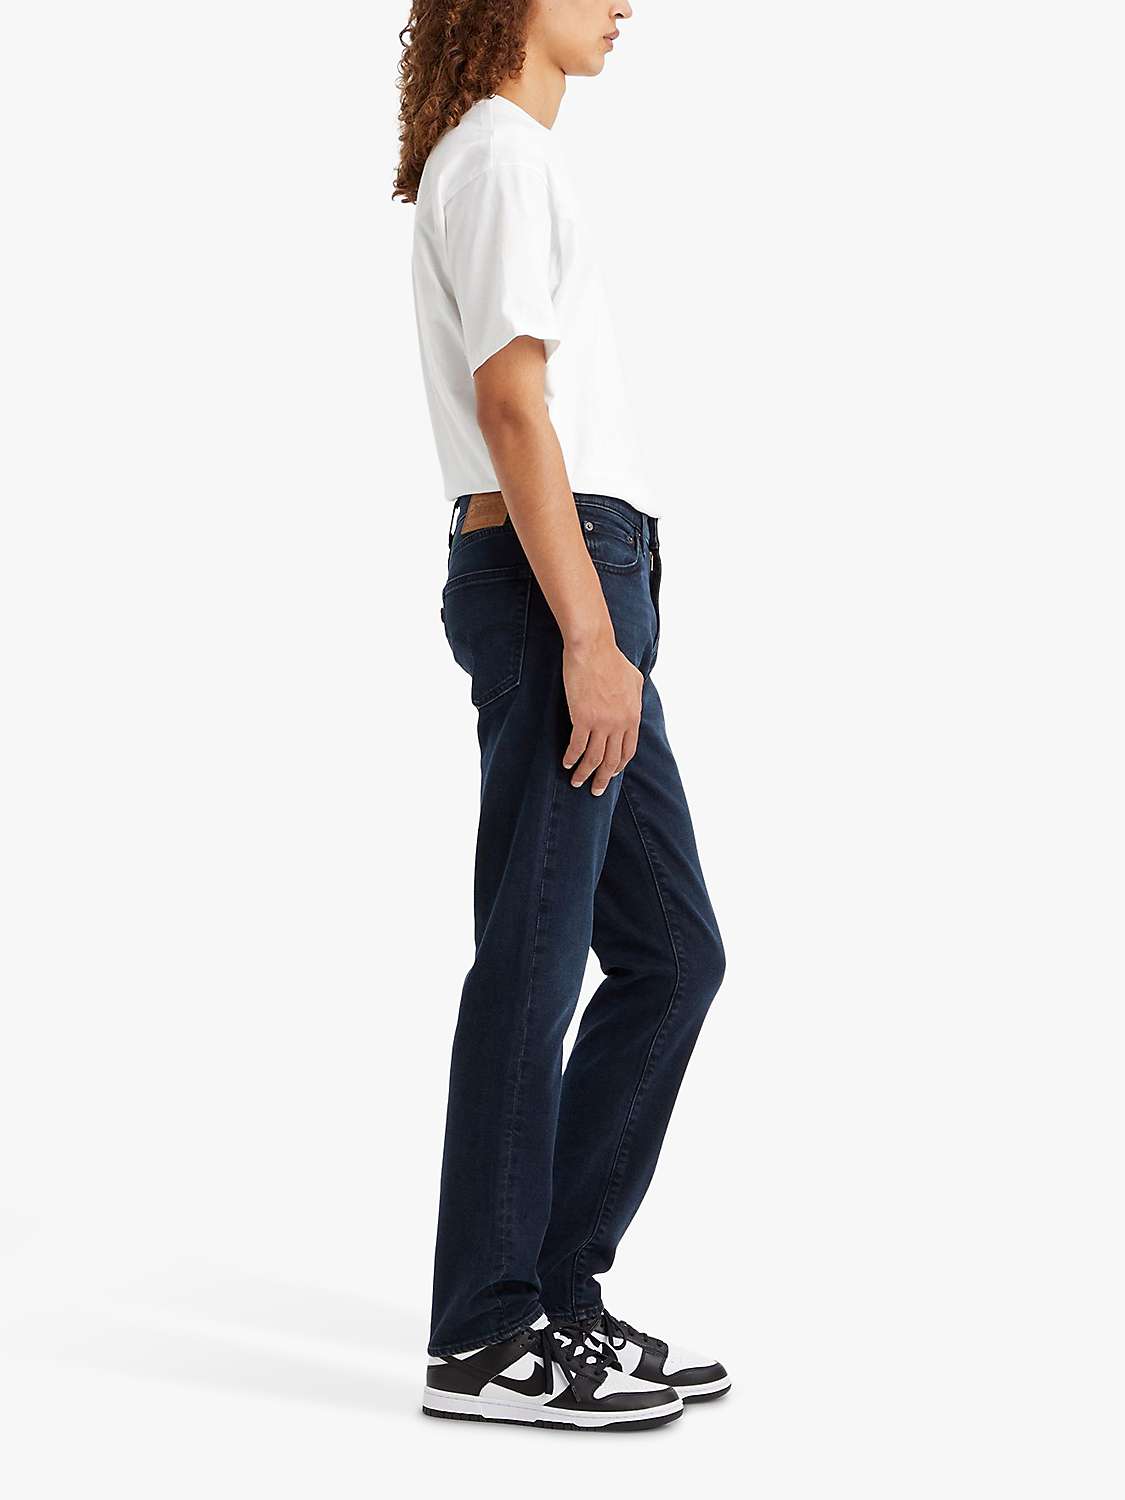 Buy Levi's 511 Slim Jeans, Chicken Of The Woods Online at johnlewis.com